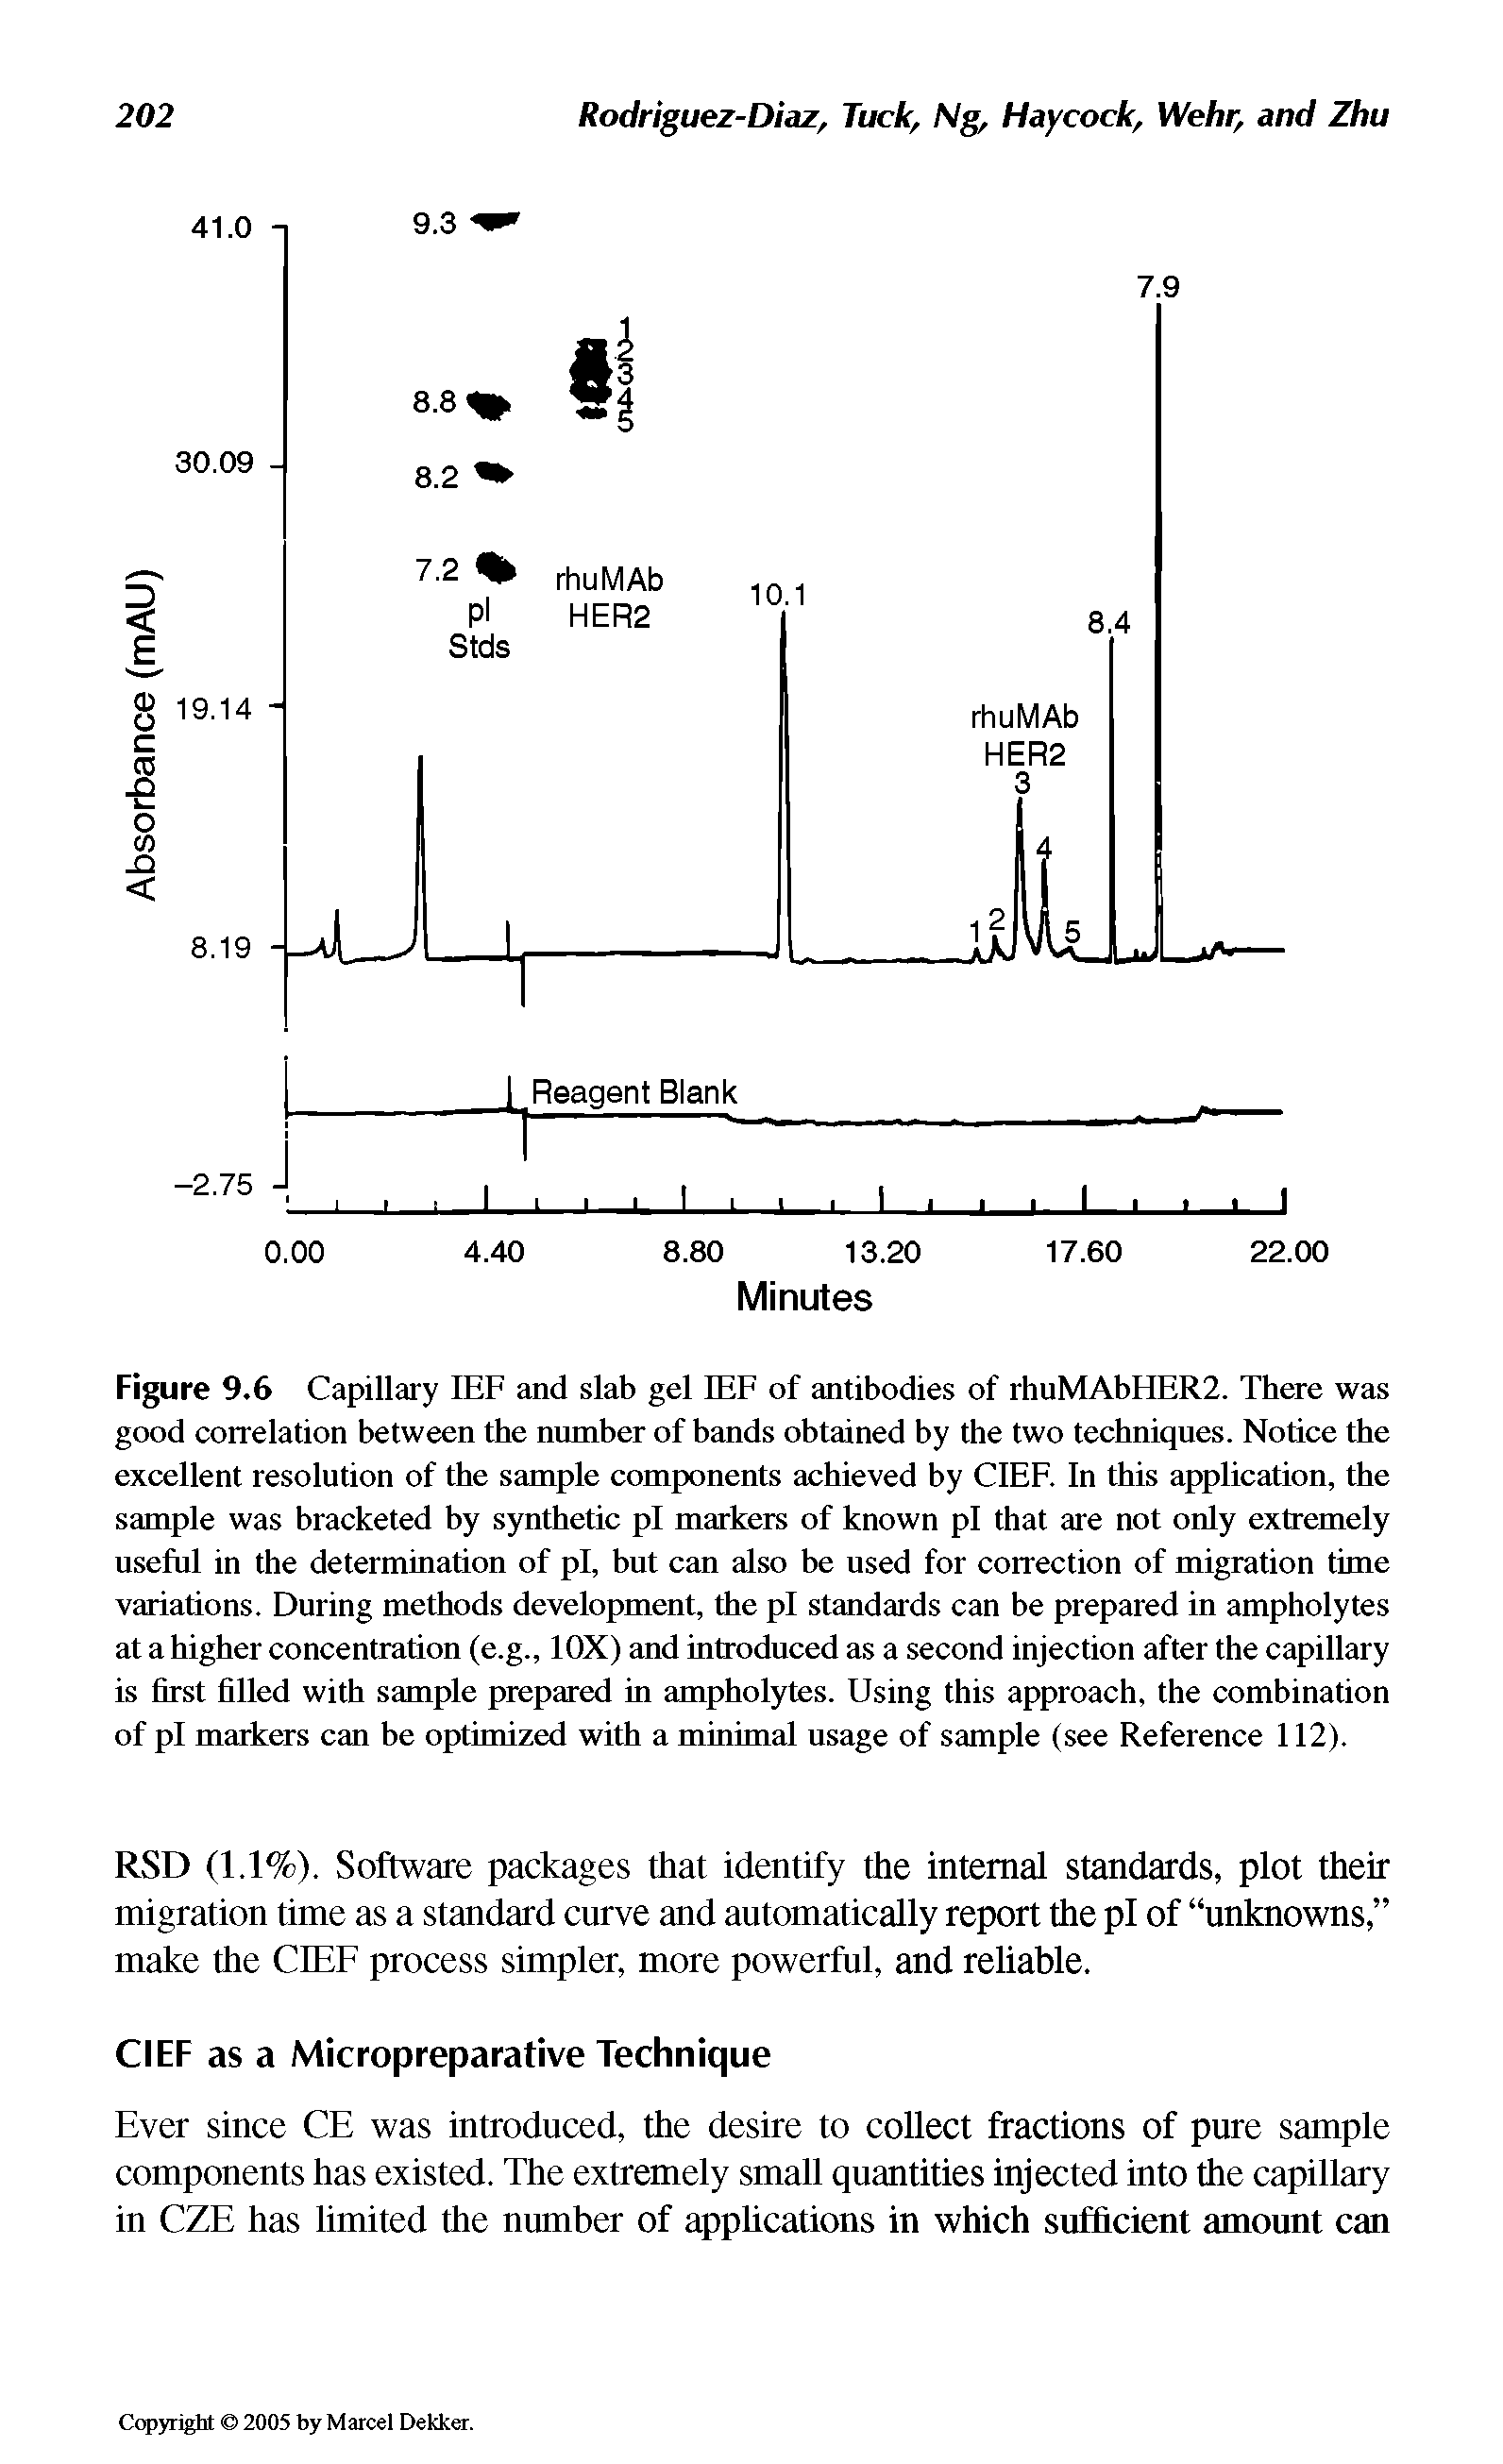 Figure 9.6 Capillary IEF and slab gel IEF of antibodies of rhuMAbHER2. There was good correlation between the number of bands obtained by the two techniques. Notice the excellent resolution of the sample components achieved by CIEF. In this application, the sample was bracketed by synthetic pi markers of known pi that are not only extremely useful in the determination of pi, but can also be used for correction of migration time variations. During methods development, the pi standards can be prepared in ampholytes at a higher concentration (e.g., 10X) and introduced as a second injection after the capillary is first filled with sample prepared in ampholytes. Using this approach, the combination of pi markers can be optimized with a minimal usage of sample (see Reference 112).